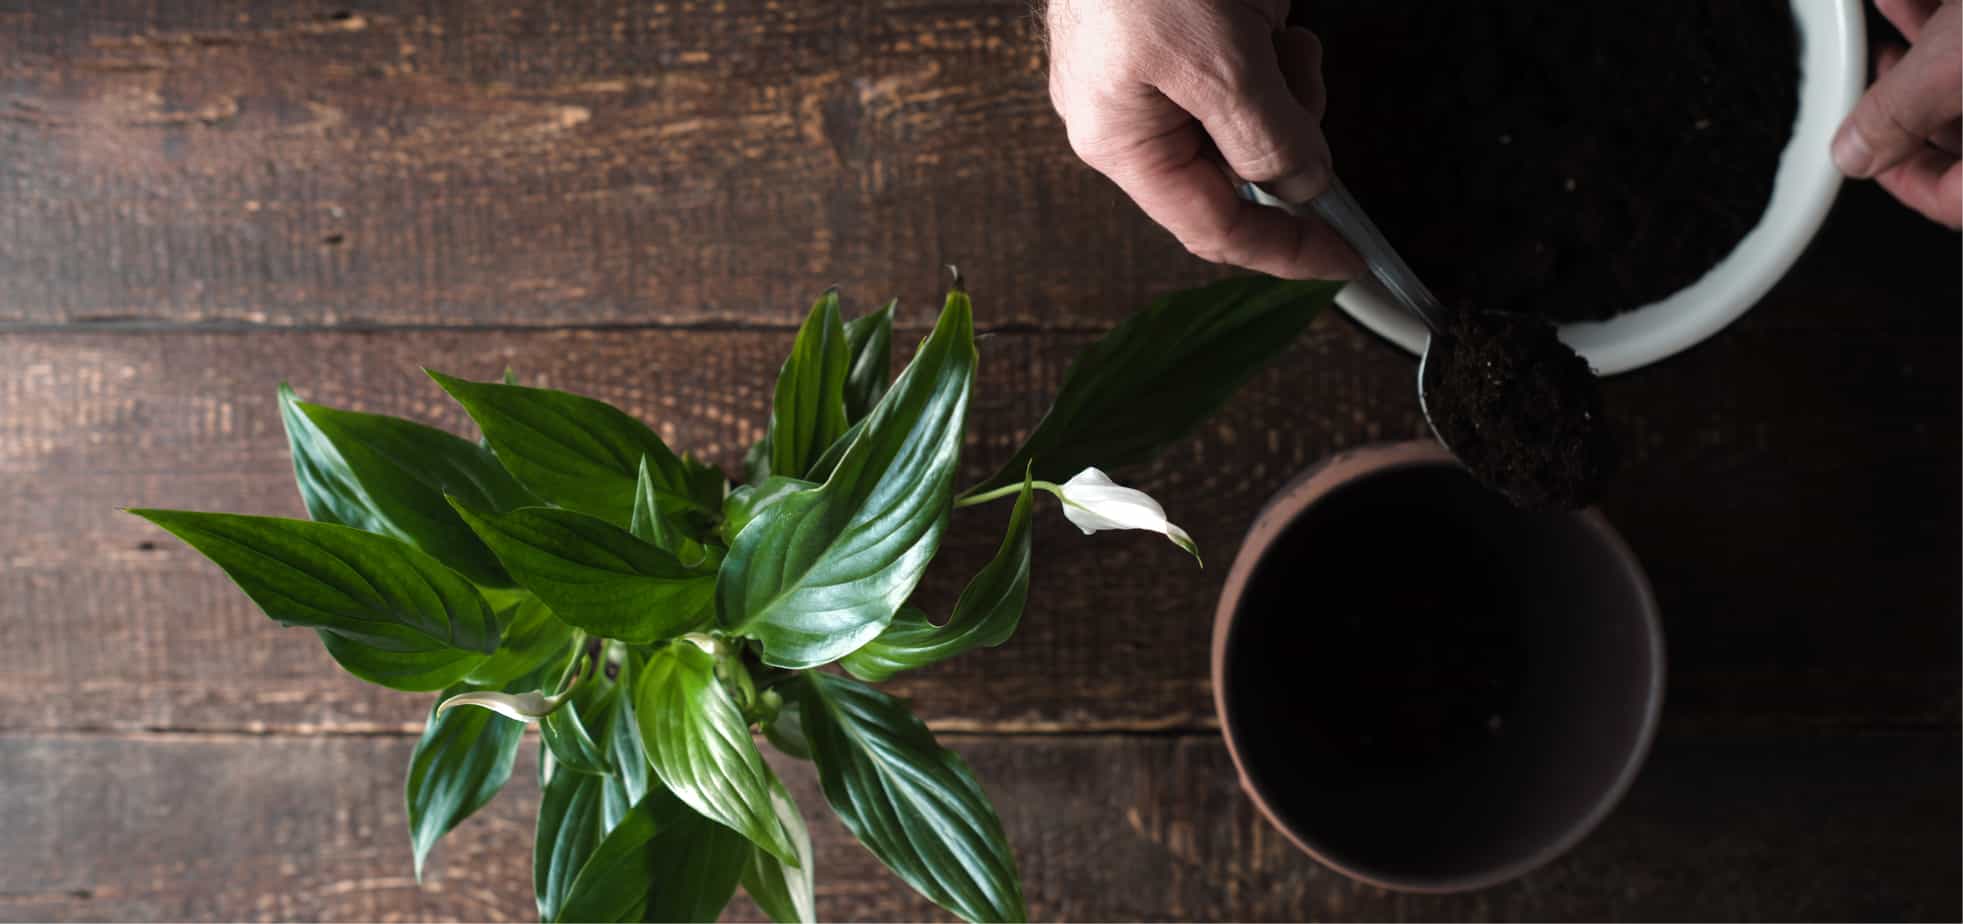 Peace lily care guide - How to plant and care for peace lilies